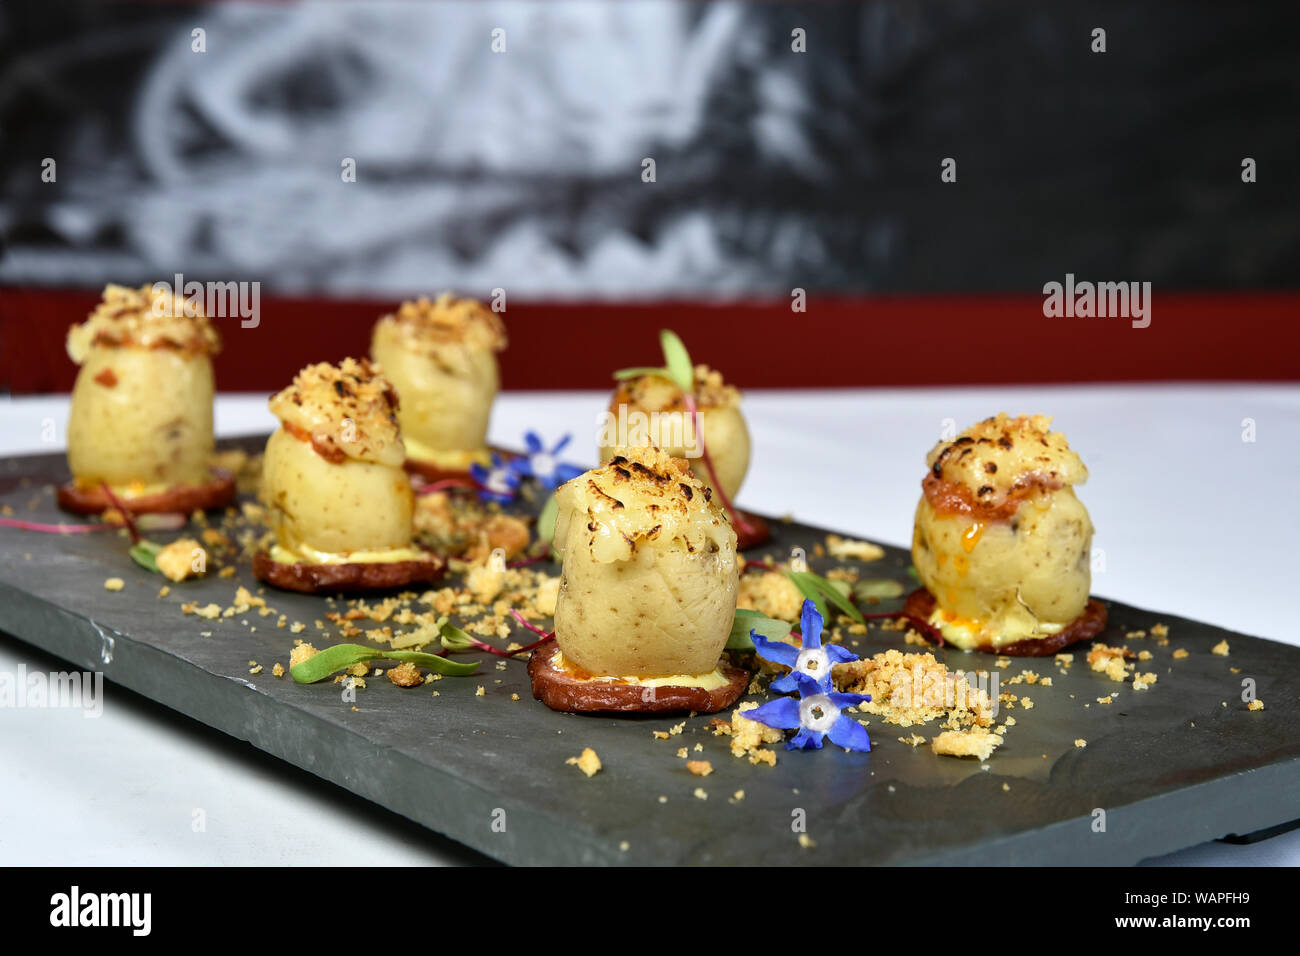 potato stuffed with meat and cheese au gratin Stock Photo